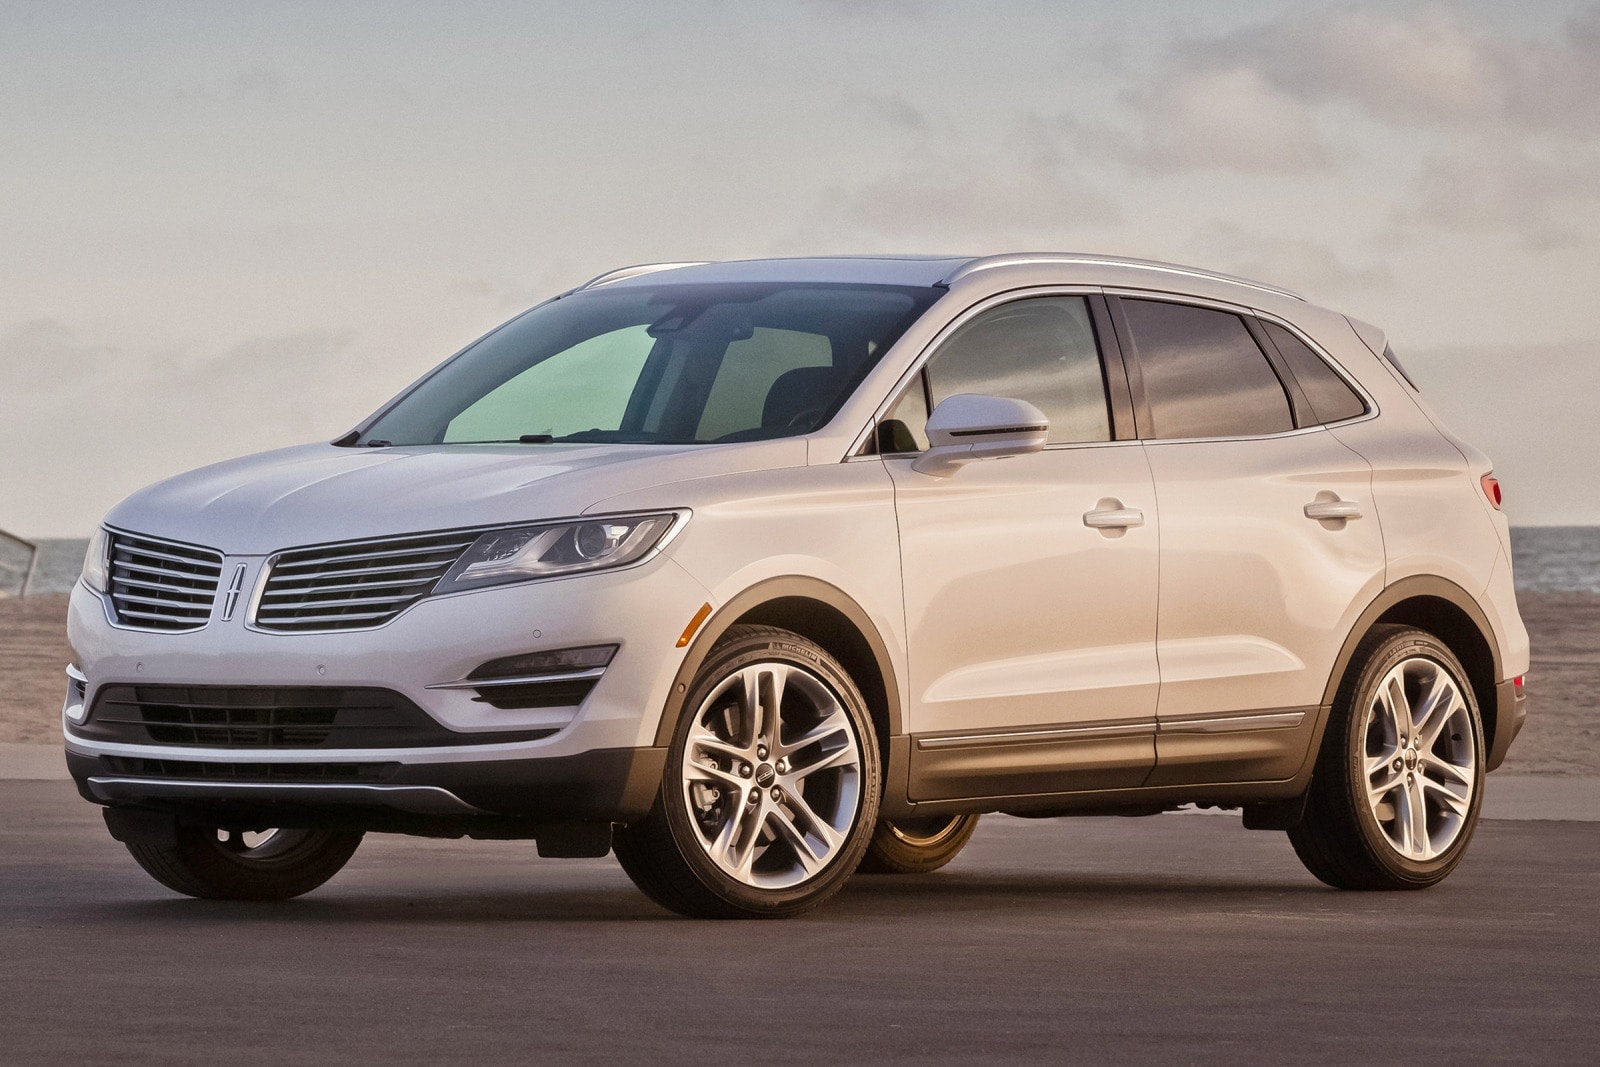 2015 Lincoln MKC Review & Ratings | Edmunds